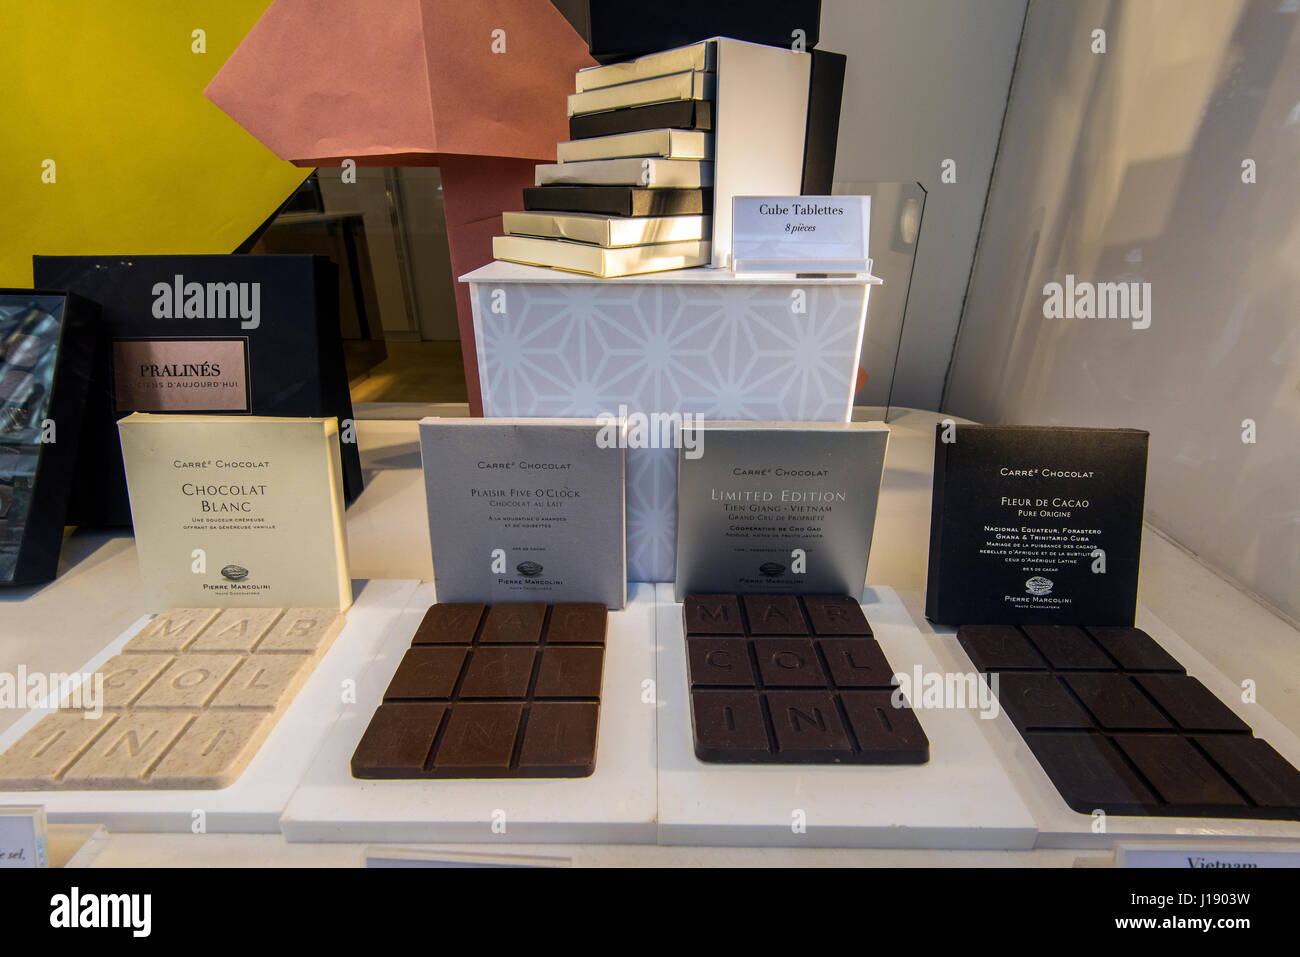 Chocolate on sale at Pierre Marcolini chocolaterie, Galeries St-Hubert, Brussels, Belgium Stock Photo